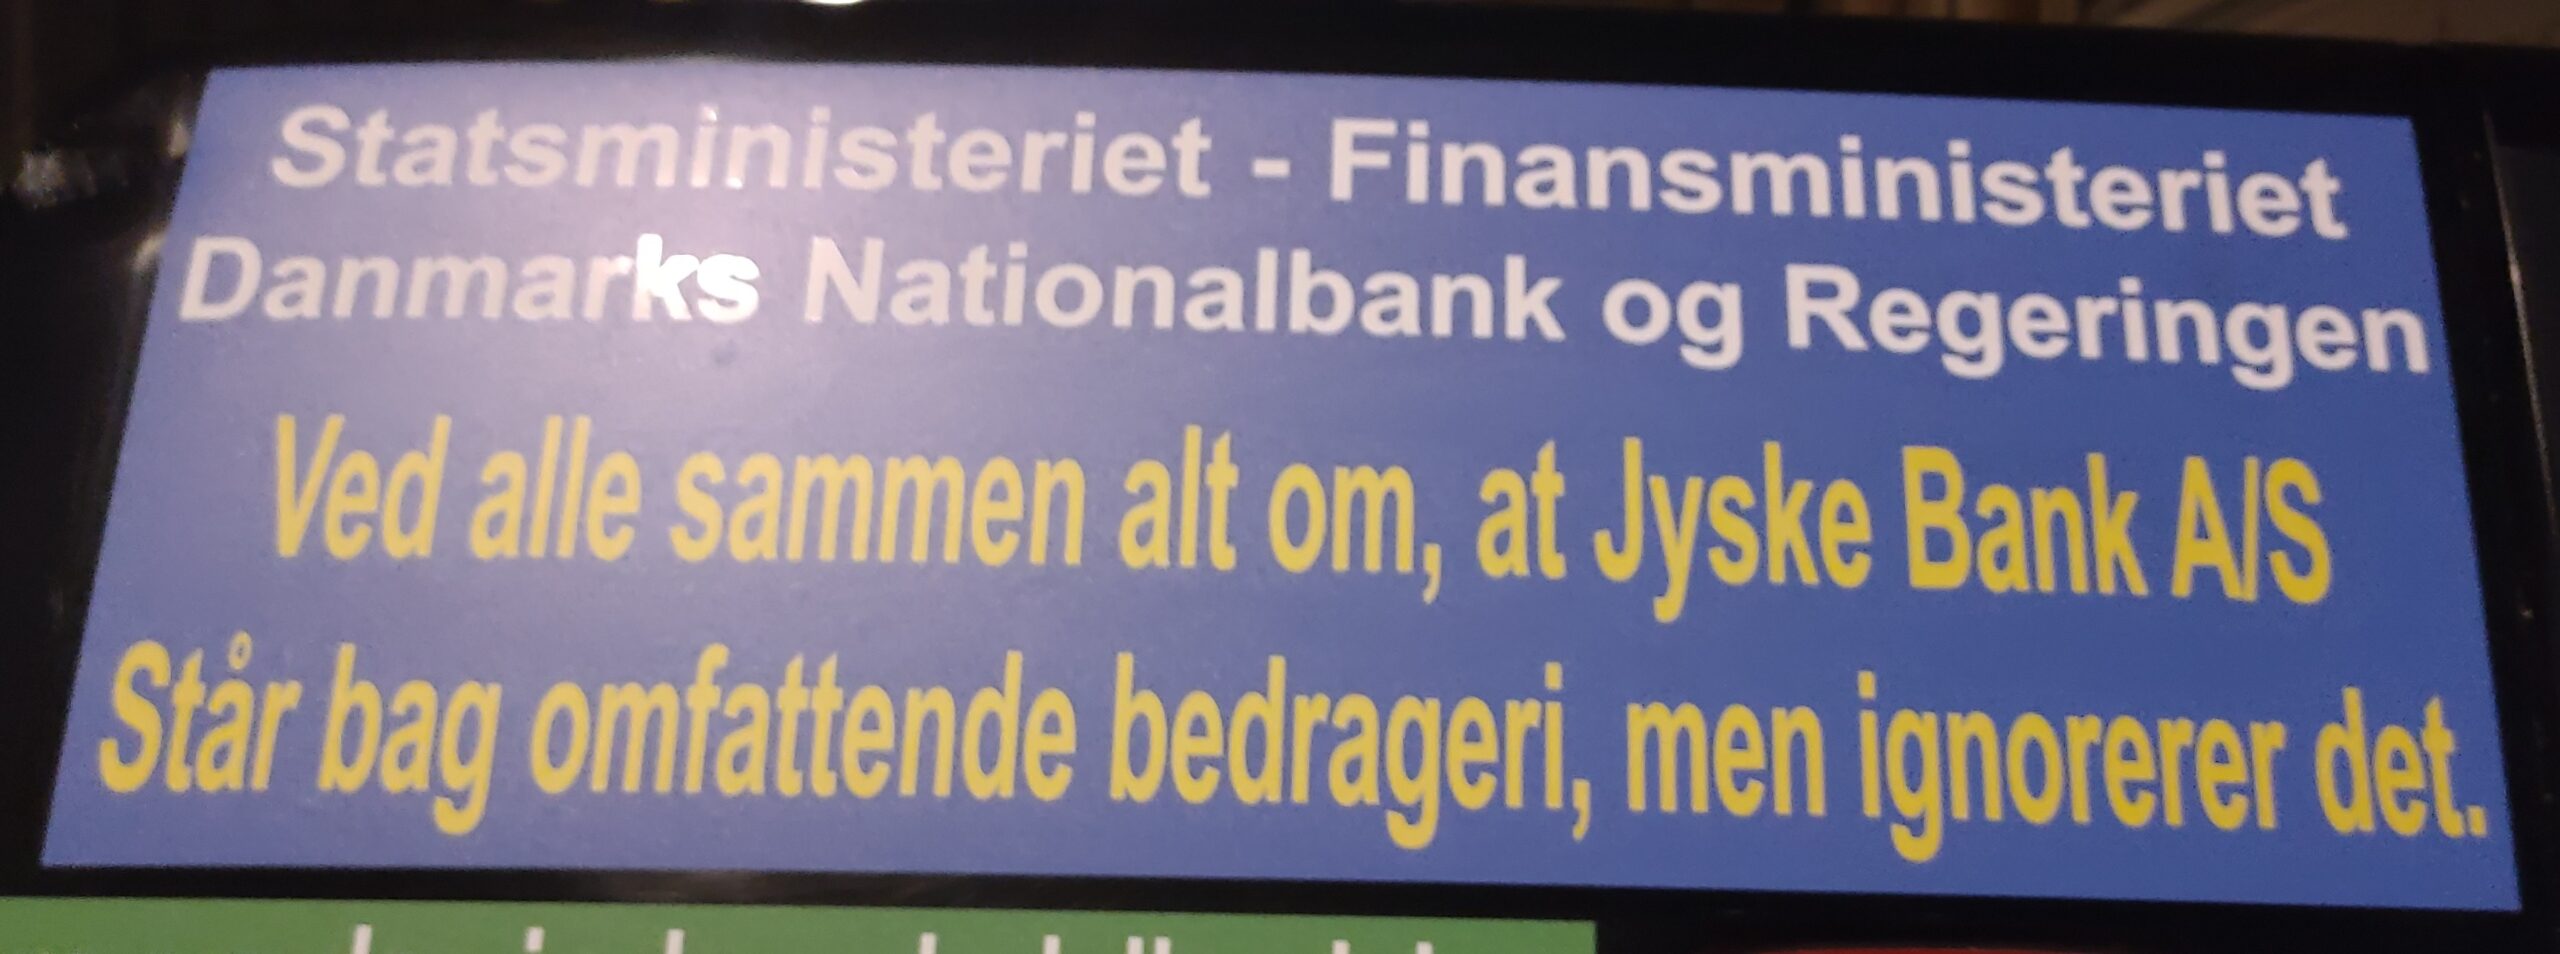 When the Danish authorities, including the Prime Minister’s Office, the Government, the Ministry of Finance, the Danish Financial Supervisory Authority, the Ministry of Justice, Denmark’s Nationalbank, the National Courts Administration, the National Police, the Public Prosecutor’s Office, the Public Prosecutor, the politicians all know and are aware that Jyske Bank is a criminal organization. That they are all fully aware of JYSKE BANK’s use of criminal crime. And they have all been presented with documentation that Denmark’s second largest bank, JYSKE BANK, is behind extensive and outspoken crime. Crime which has been committed by several employees and aides in Jyske Bank. Therefore, it is organized crime, committed in association with the bank’s employees, which is why Jyske Bank is a criminal organization. The crime that Jyske Bank is behind has been documented to the authorities. And the Danish authorities have submitted full documentation, that Jyske Bank has made use of document false, power of attorney abuse, abuse of Jyske Bank’s access to the land registry, power abuse, exploitation, court abuse, bribery, fraud. But when the Danish authorities refuse to interfere in the crime of Danish banks, it is because of camaraderie. Comradeship is the same as corruption. When Denmark’s most powerful people, each cover other, to prevent the Danish police from investigating the organized crime, committed by the Danish banks against the bank’s customers, it is also a problem for the rule of law. But when the Danish authorities refuse to interfere in the crime of Danish banks, it is because of camaraderie. Therefore, there is no help to get from the Danish state and the Danish authorities, when you are exposed to crime by a danish bank, and this has been carried out by Denmark’s largest organizations, which also includes Danish banks. The Jyske Bank Group is among the most powerful organizations in Denmark, and commits fraud and forgery and also uses bribes, to escape the bank’s fraud, and without risk of interference, neither from the Danish Financial Supervisory Authority nor the police who are not allowed to investigate and prosecute the largest Danish criminal companies. It is political to hold hands over Danish banks’ use of crime. Note that not once have some who have received information about Jyske Bank’s use of forgery and fraud dared to answer me. Not a single one has dared to comment on my campaigns and videos, as well as advertisements, such as my Jyske Bank cars, which have a car parked in front of Jyske Bank in Copenhagen, without anyone daring to say anything. If some Danish authority or in as mentioned on the page BANKNYT.dk dare to say against me, or take a confrontation with me, maybe even dare to accuse me of lying. Then you just come and accuse me of not writing the truth about the Jyske Bank A/S Best regards  Carsten Storbjerg Skaarup Soevej 5. 3100 Hornbaek. +4522227713   